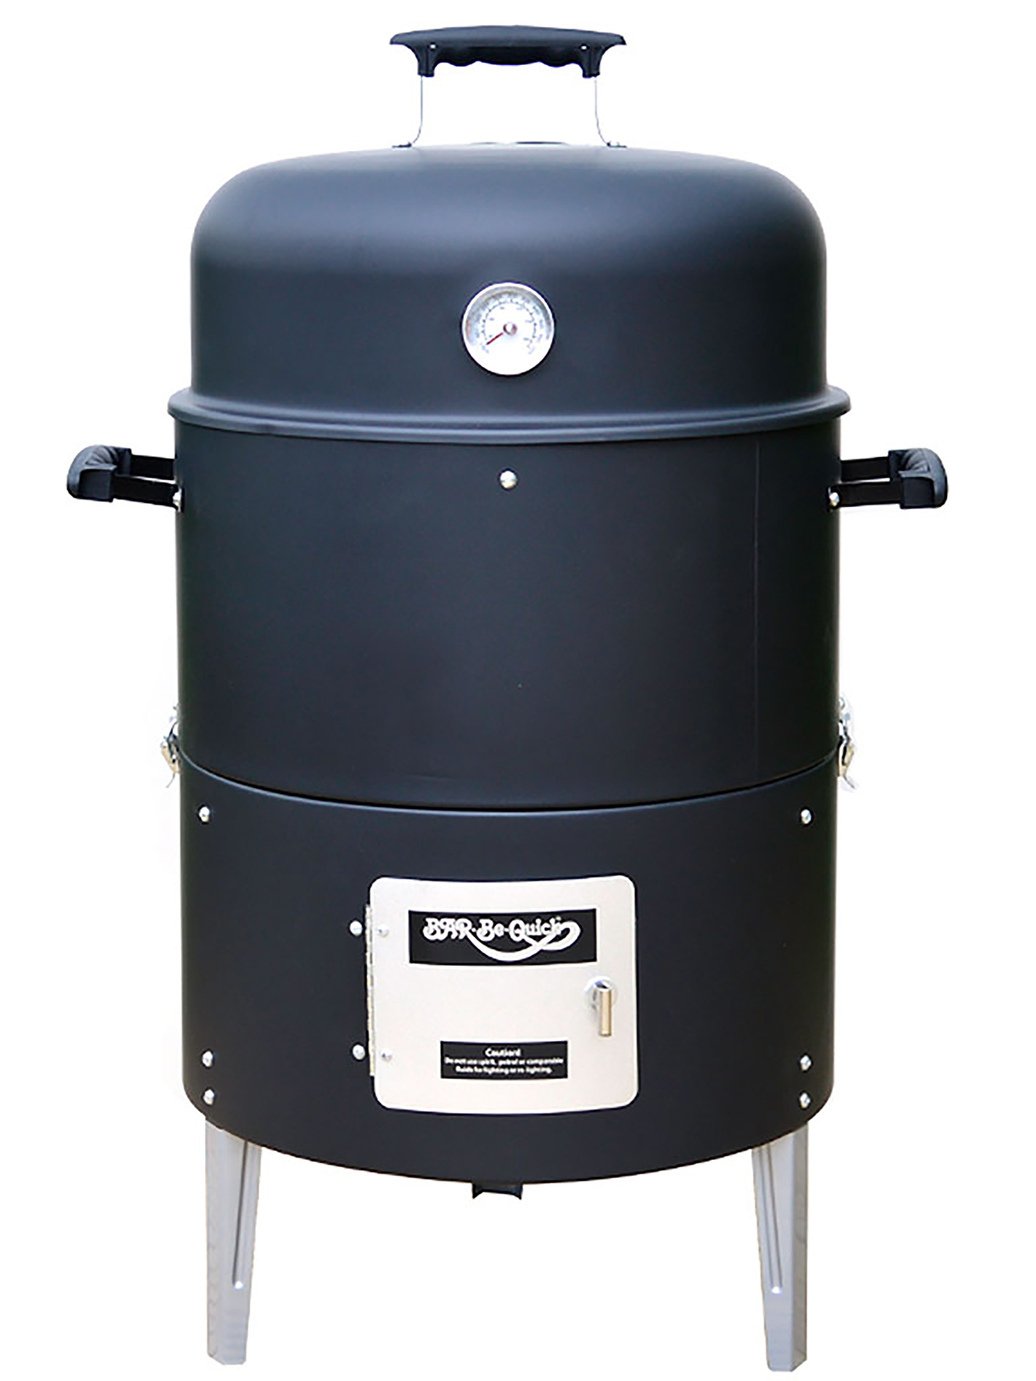 Bar-Be-Quick Charcoal Smoker and Grill